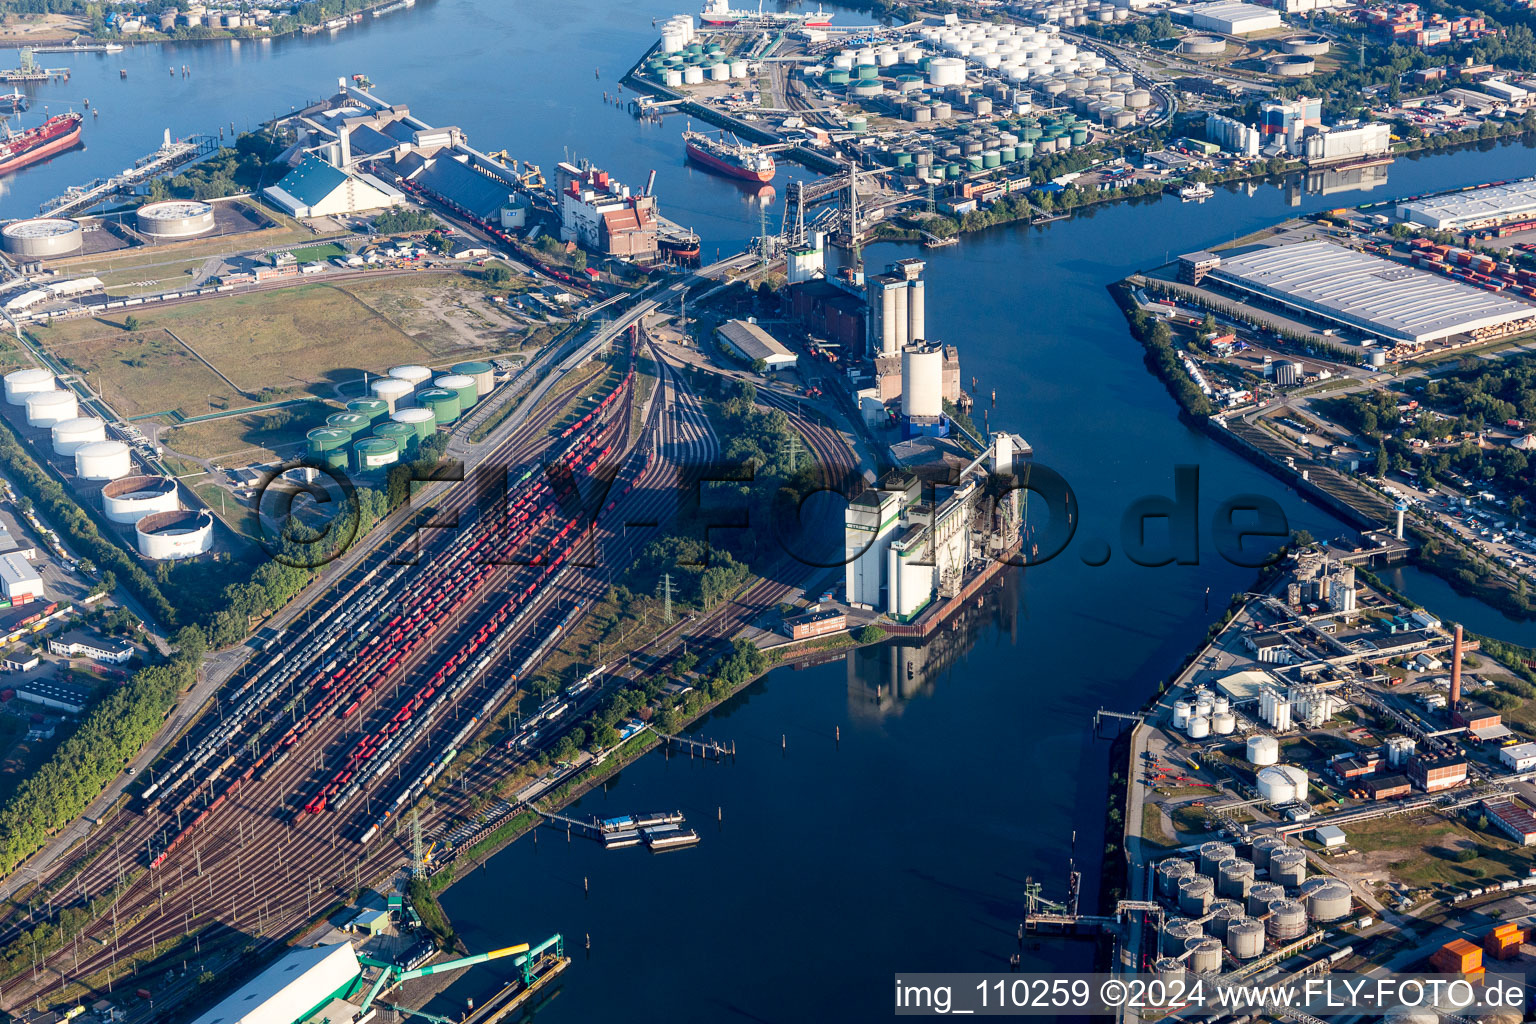 Marshalling yard and freight station of the Deutsche Bahn at the Schluisgroven haven in Hamburg, Germany